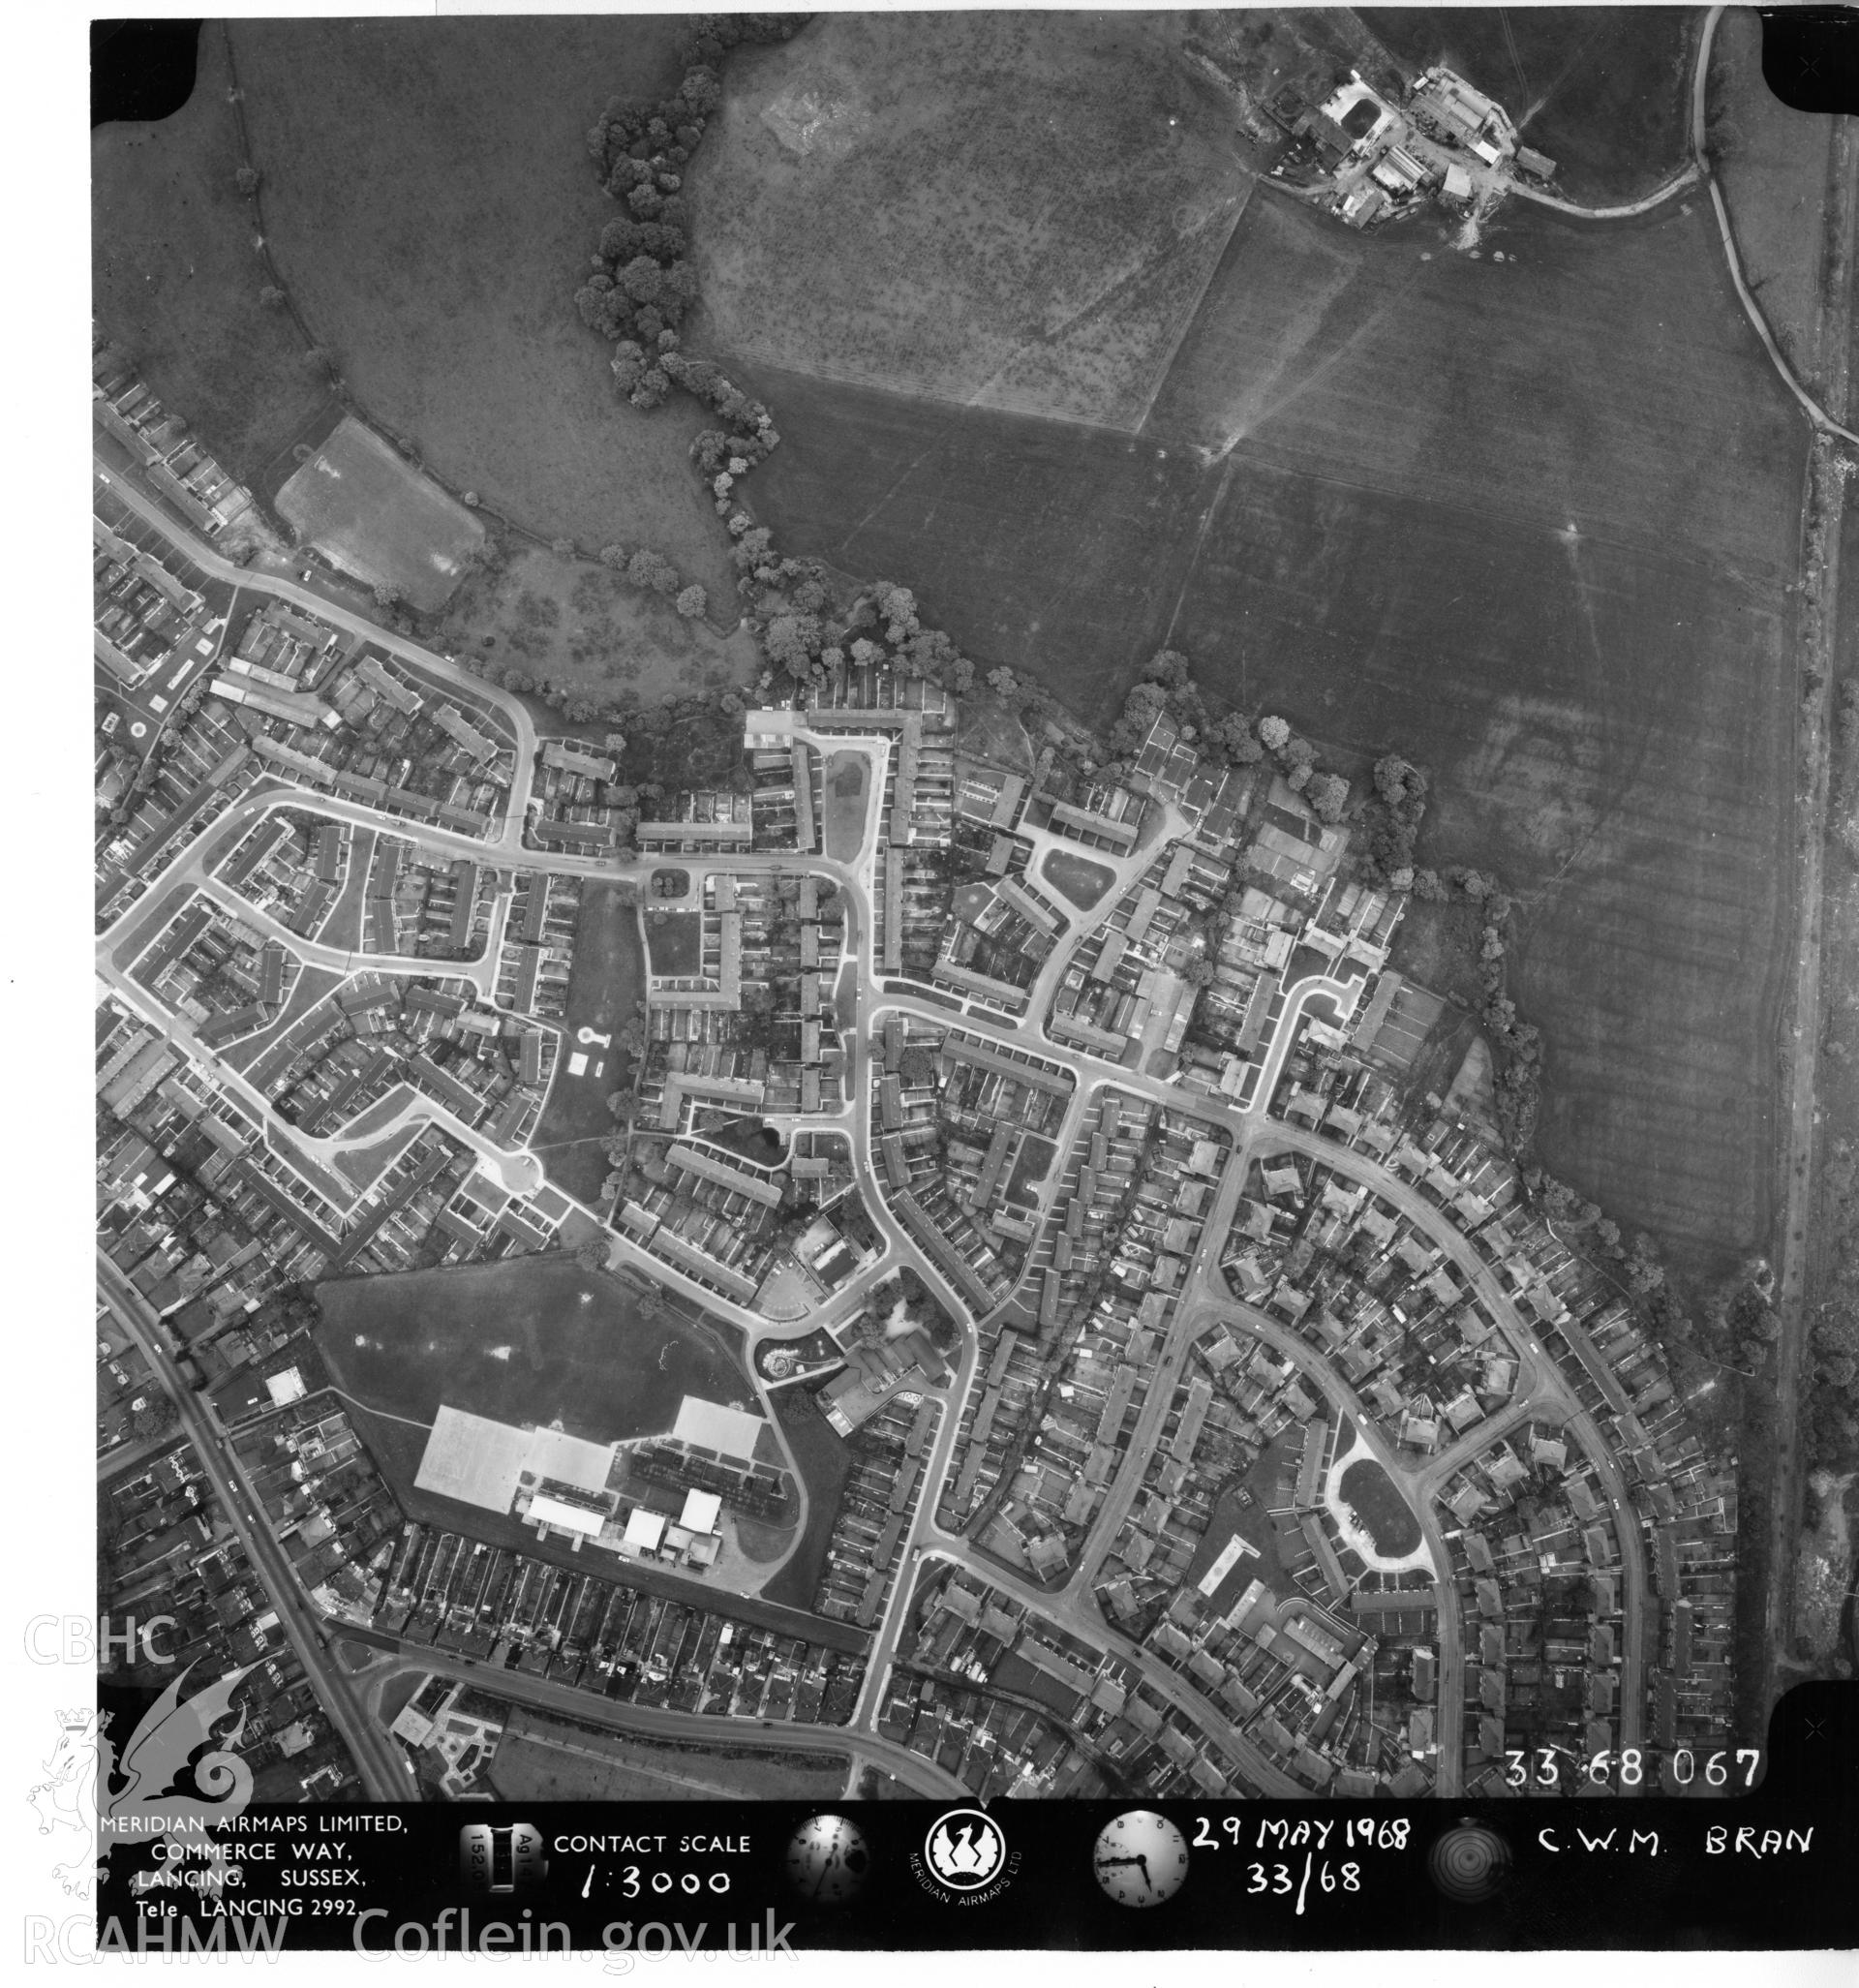 Aerial photograph of Cwmbran, taken on 29th May 1968. Included as part of Archaeology Wales' desk based assessment of former Llantarnam Community Primary School, Croeswen, Oakfield, Cwmbran, conducted in 2017.